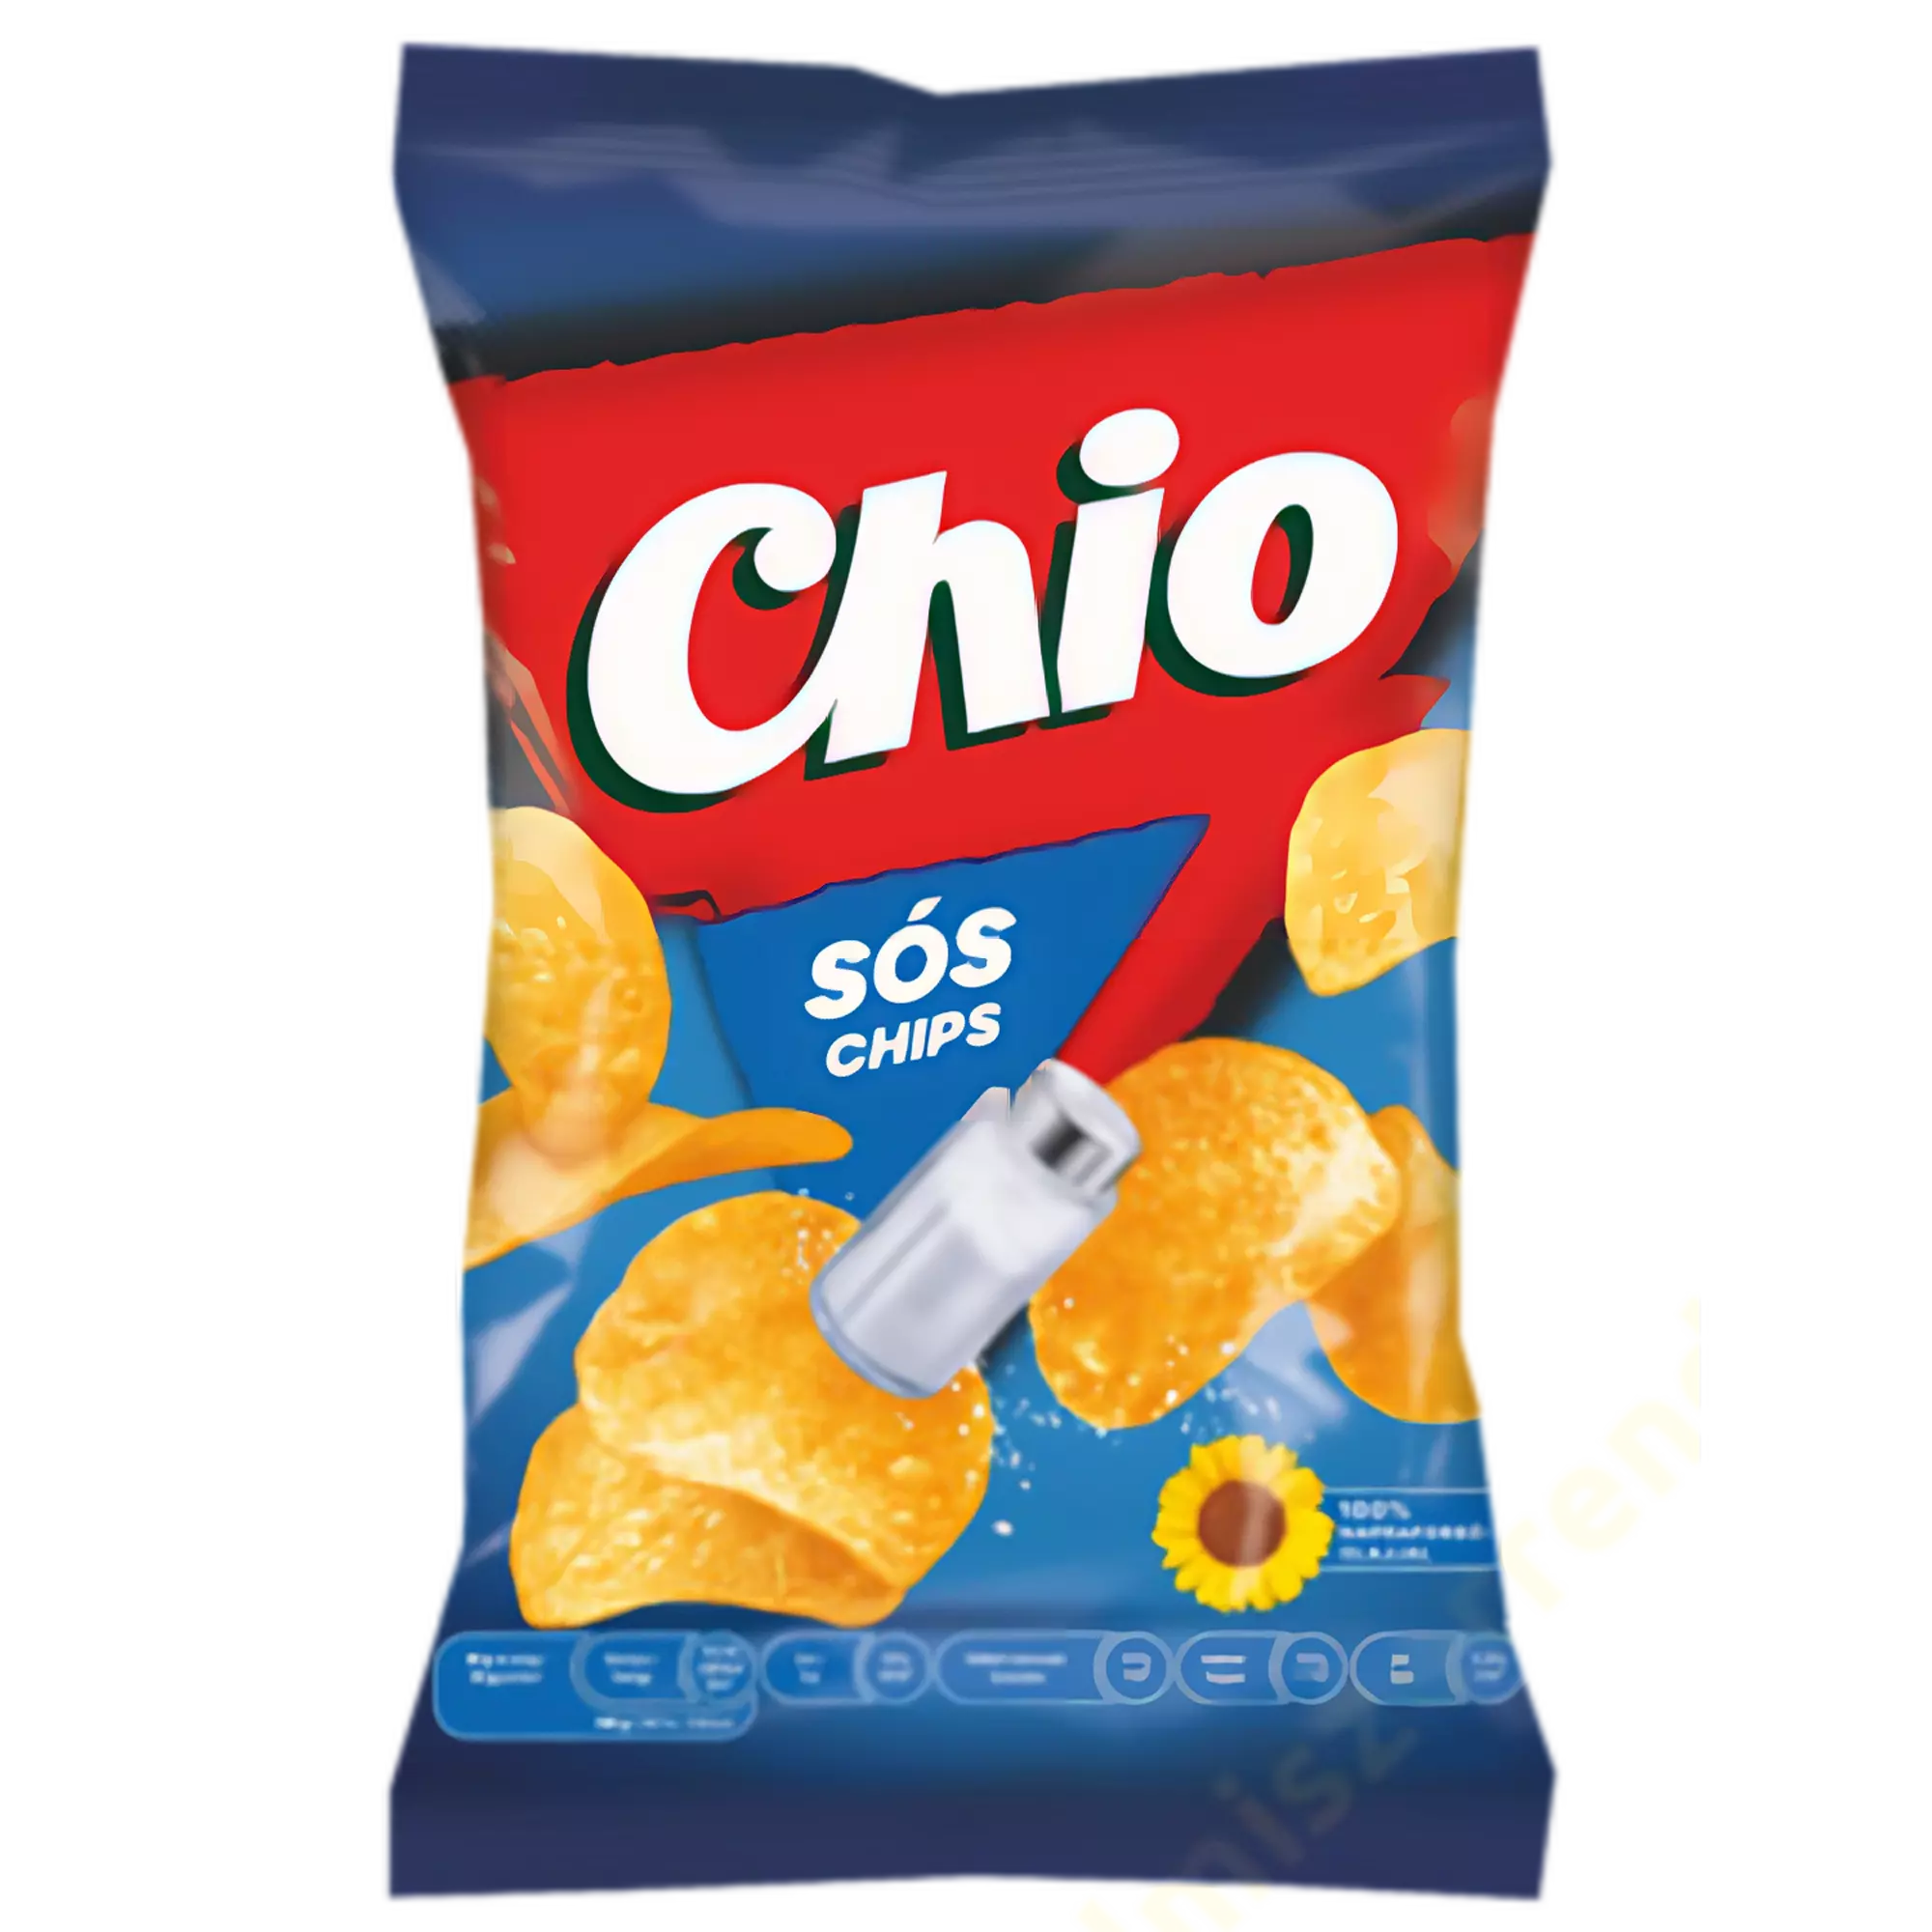 .Chio Chips 60g sós